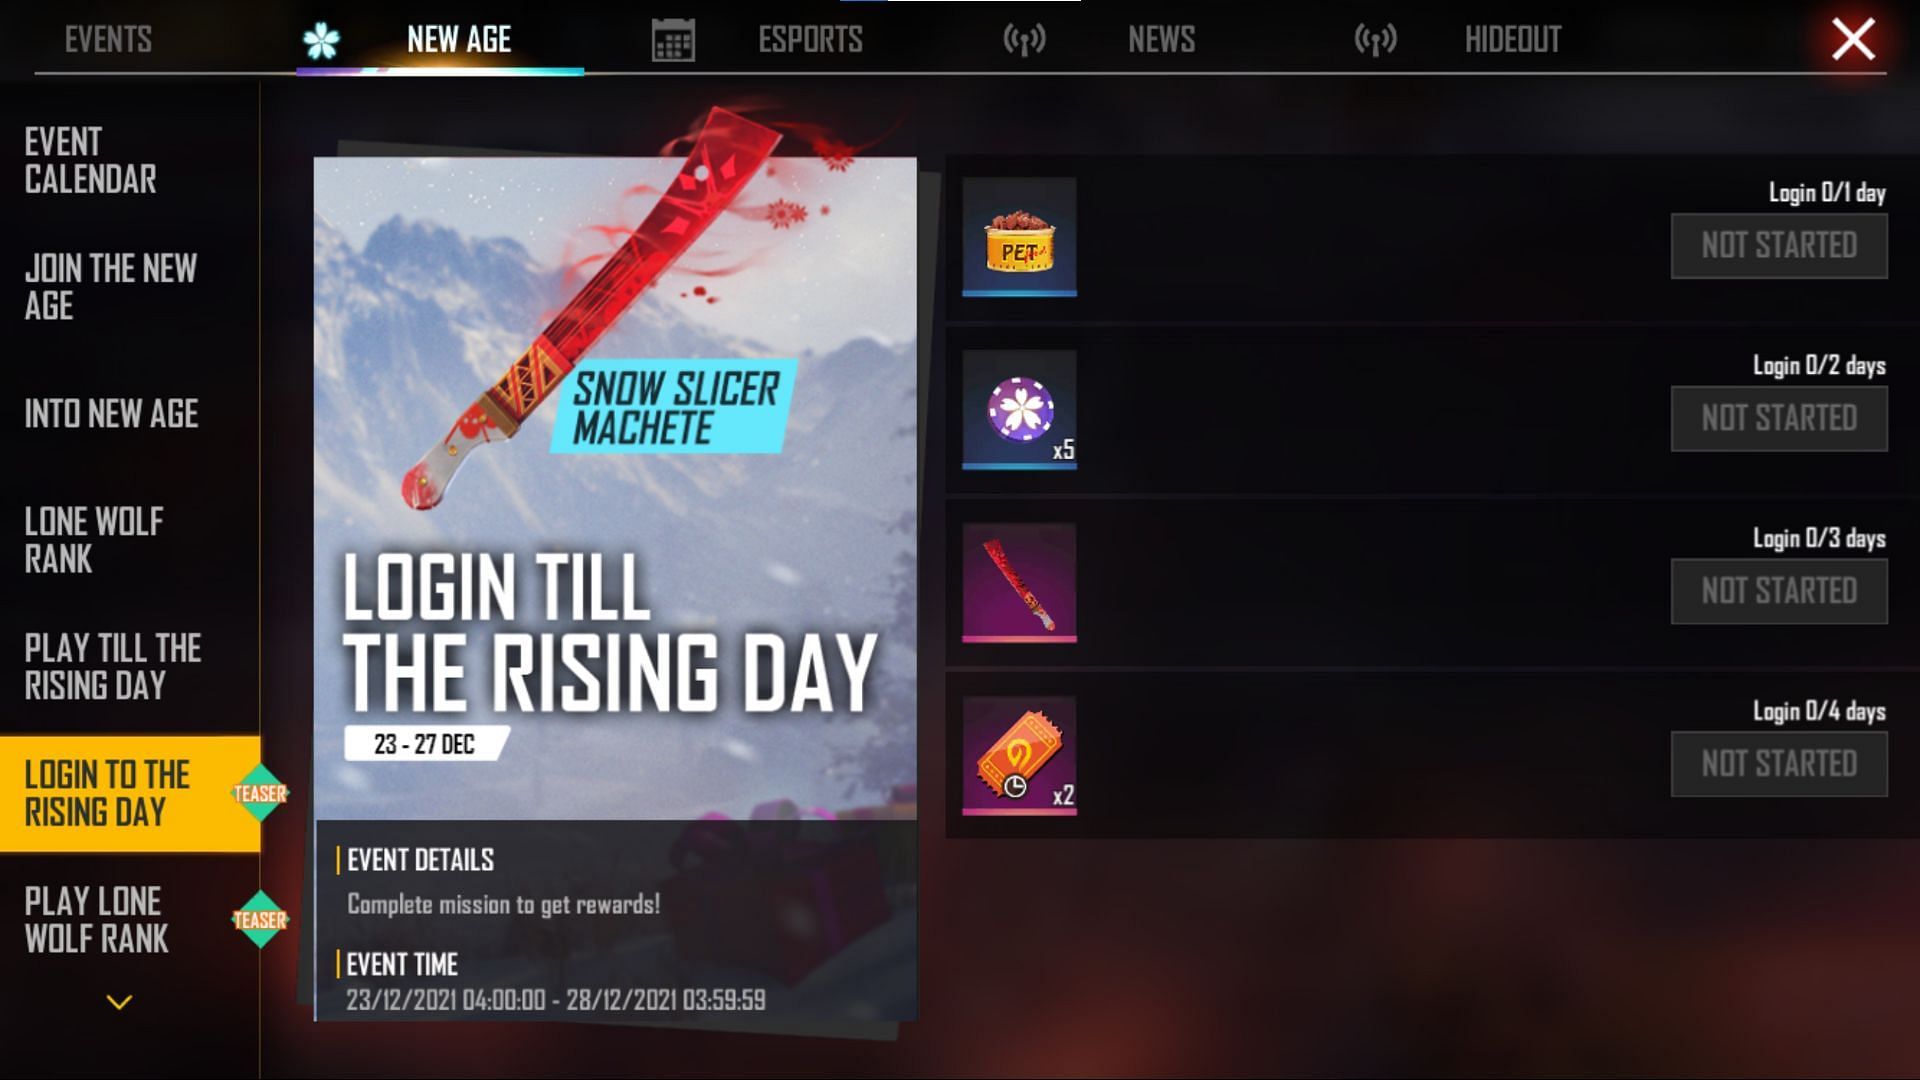 The event will start on 23 December (Image via Free Fire)